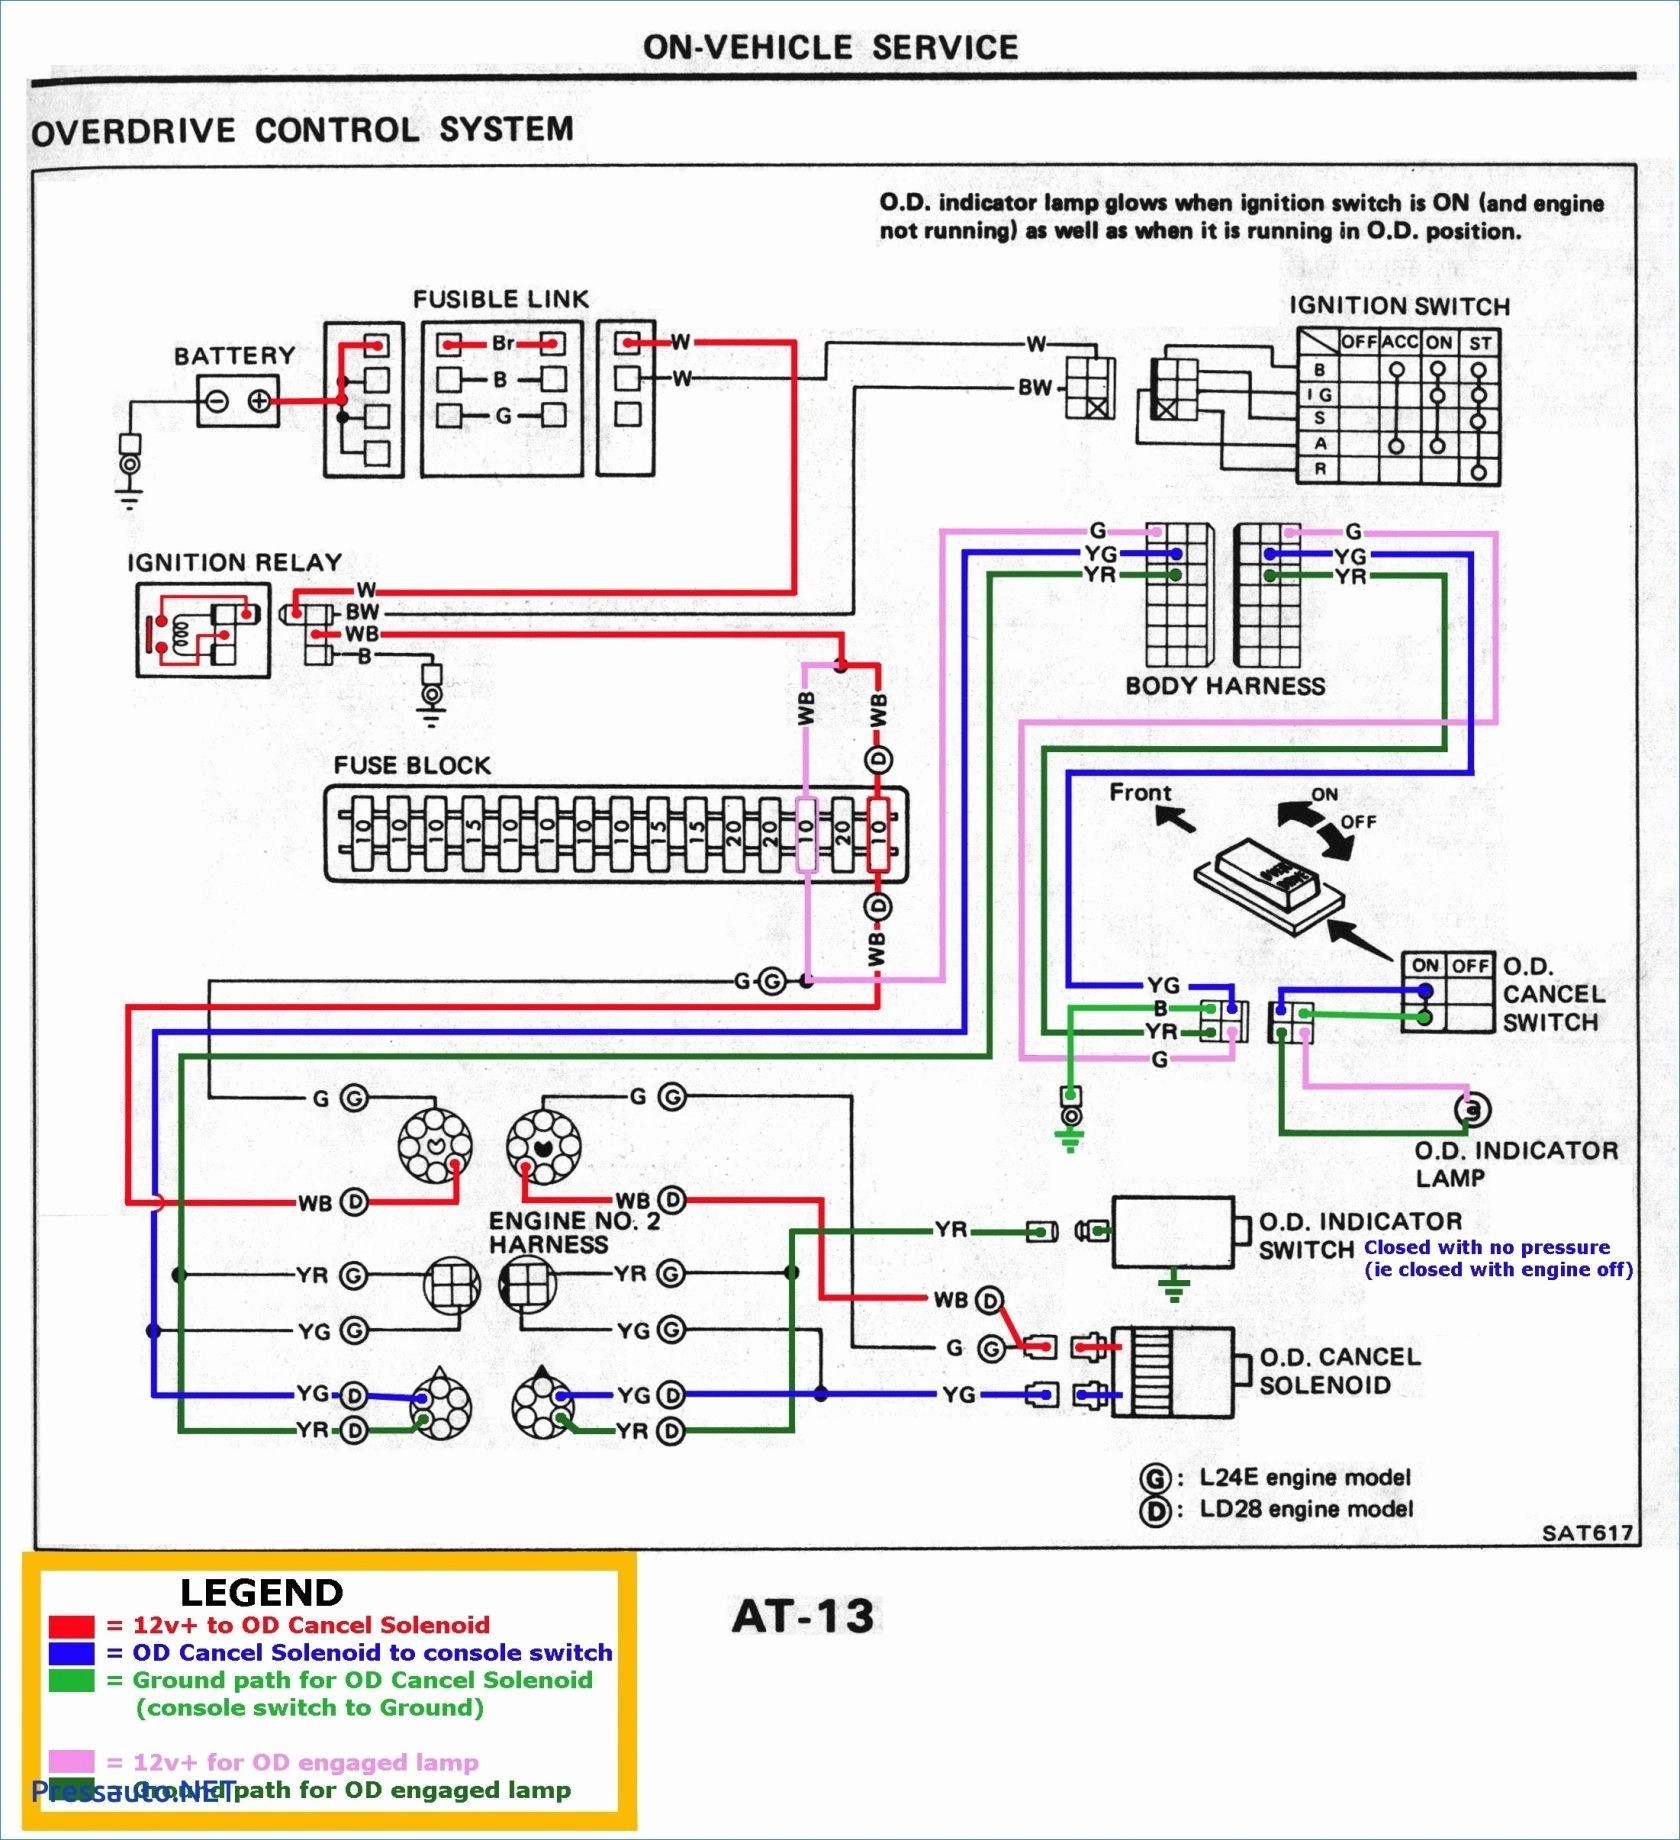 Warn Contactor Wiring Diagram New Wiring Diagram Winch solenoid Refrence Wiring Diagram for Warn Winch